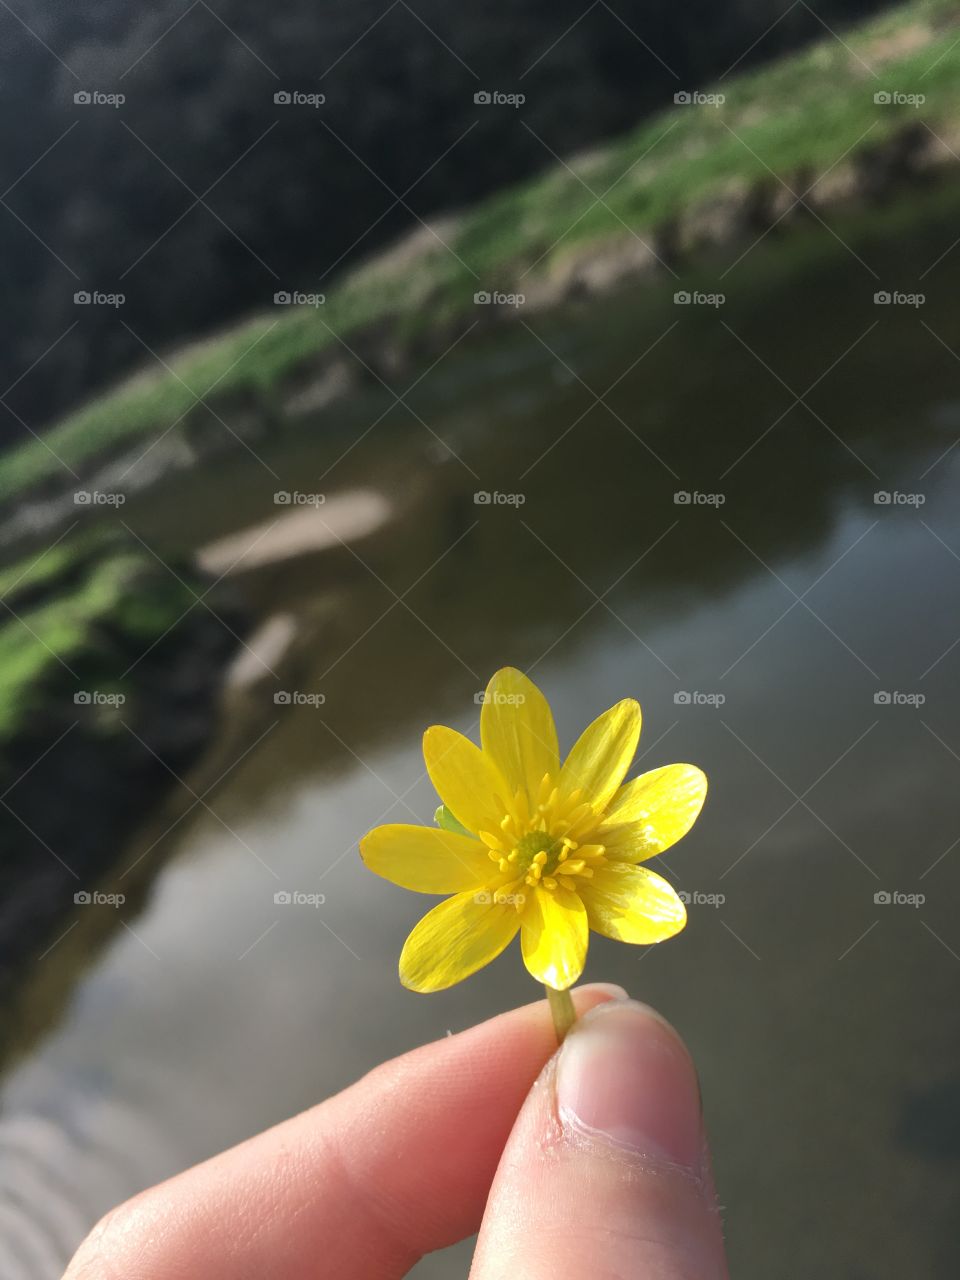 Brightly shone upon buttercup glowing with yellow rays whilst a slow bend in the river peers behind 